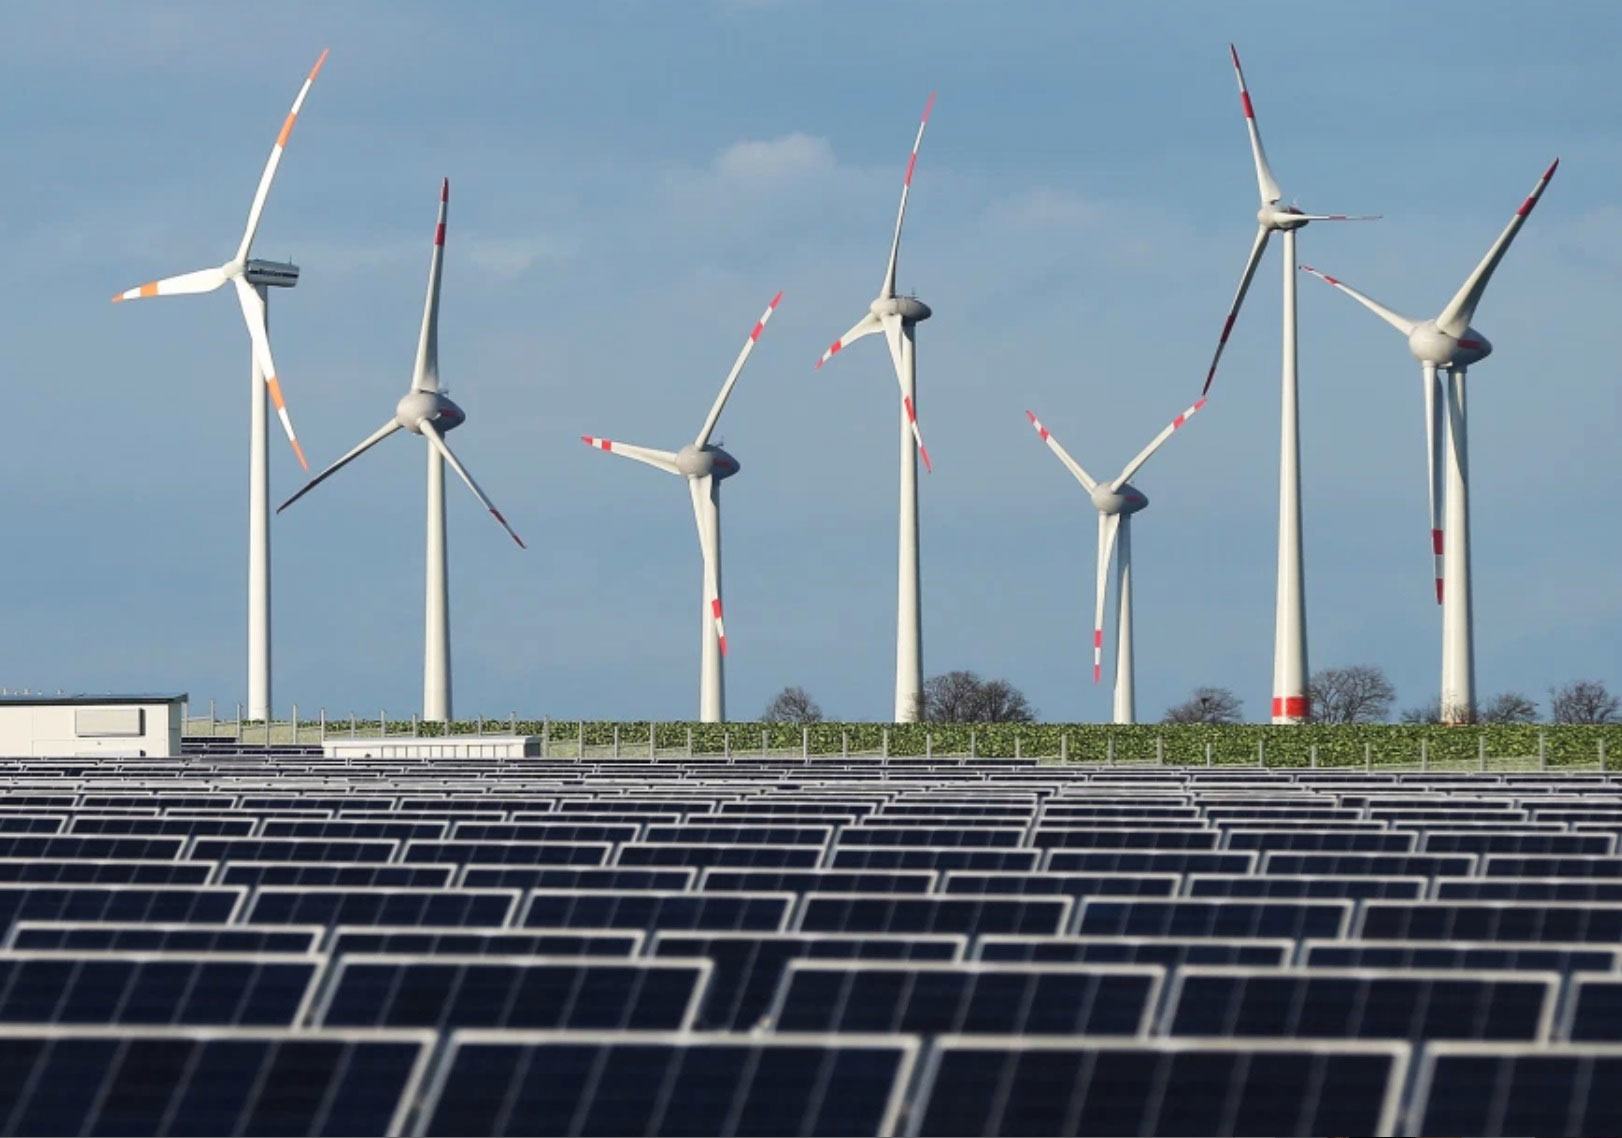 Wind farms and solar panels generate electricity and reduce reliance on coal-powered energy.